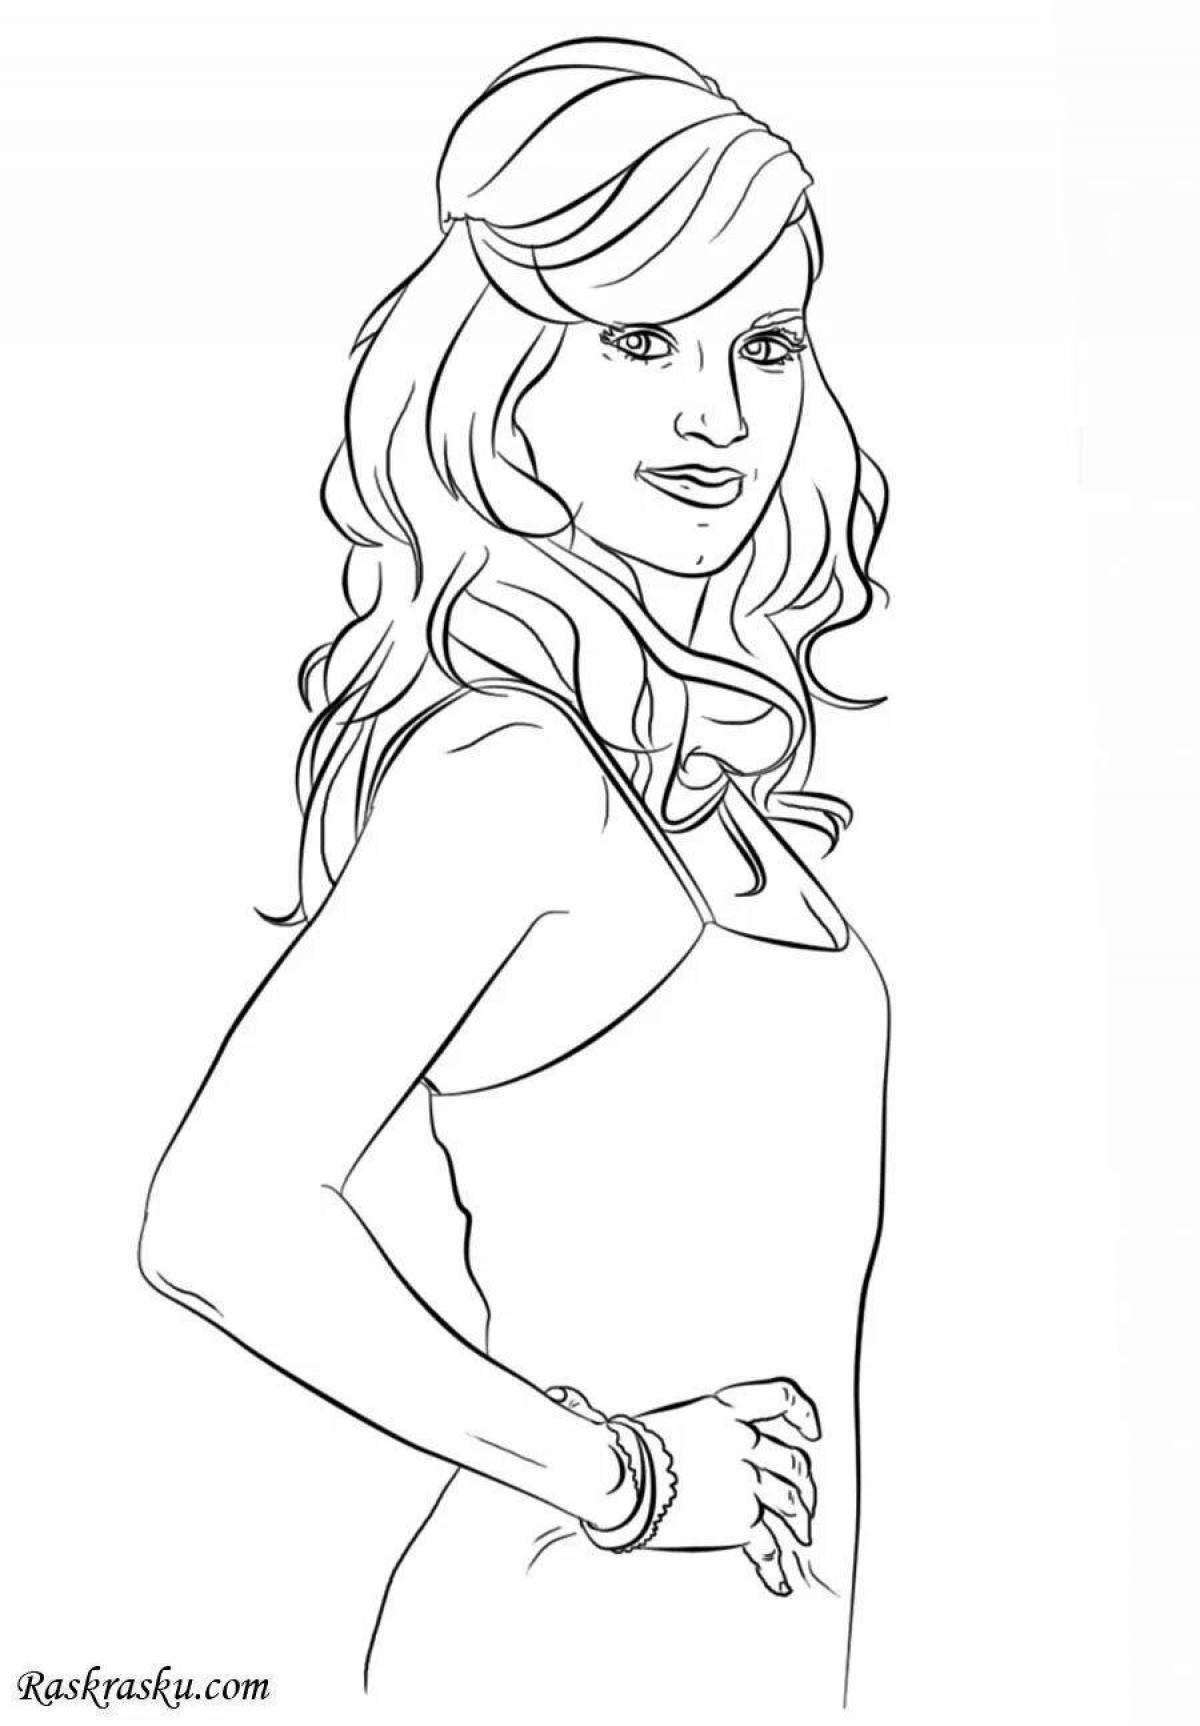 Celebrity funny coloring pages